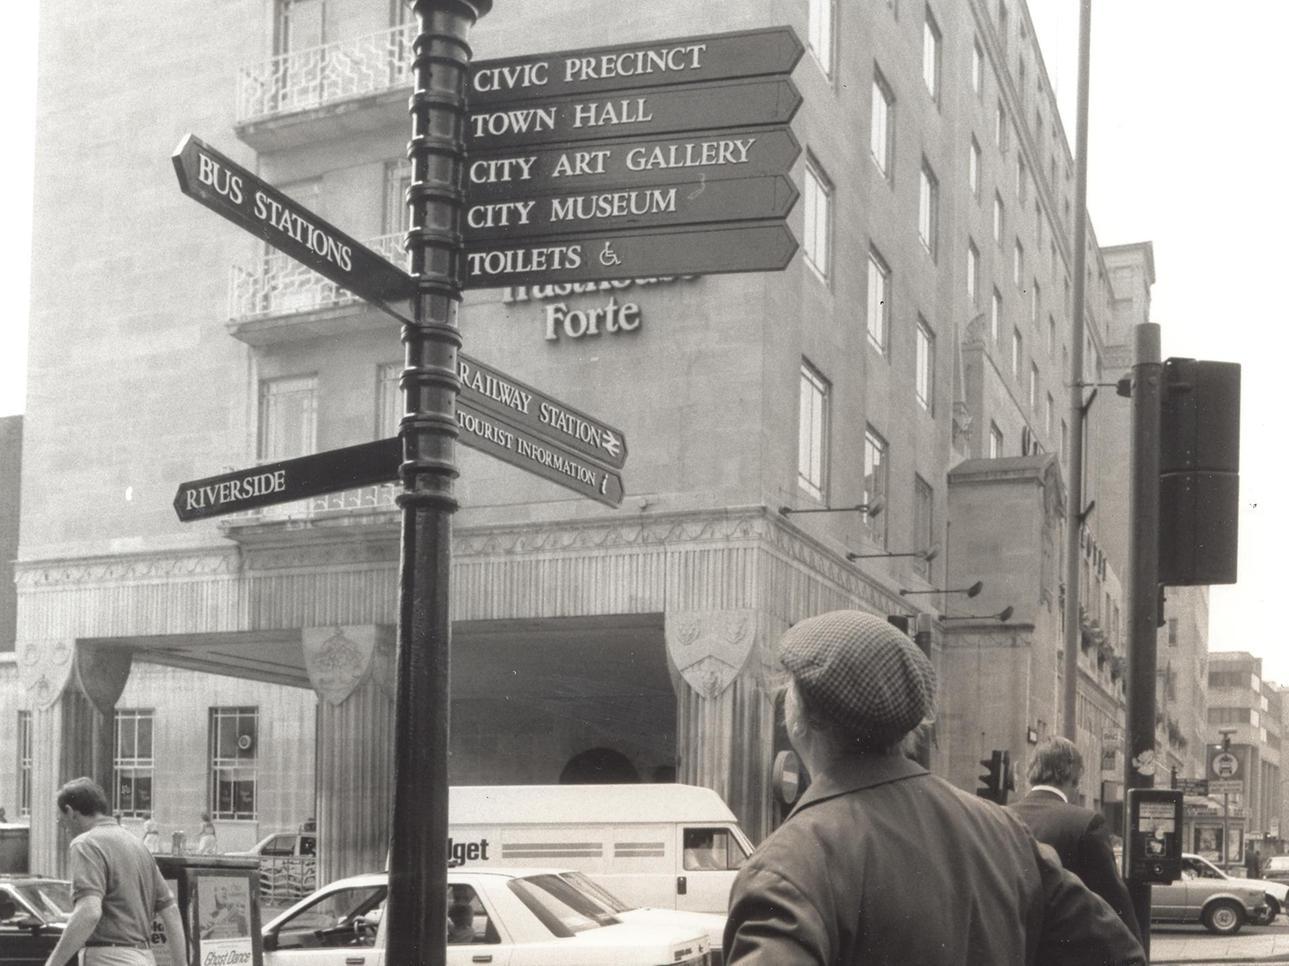 Finding the way around Leeds became much easier thanks to this finger signpost in City Square. It was one of nine dotted around the city centre.